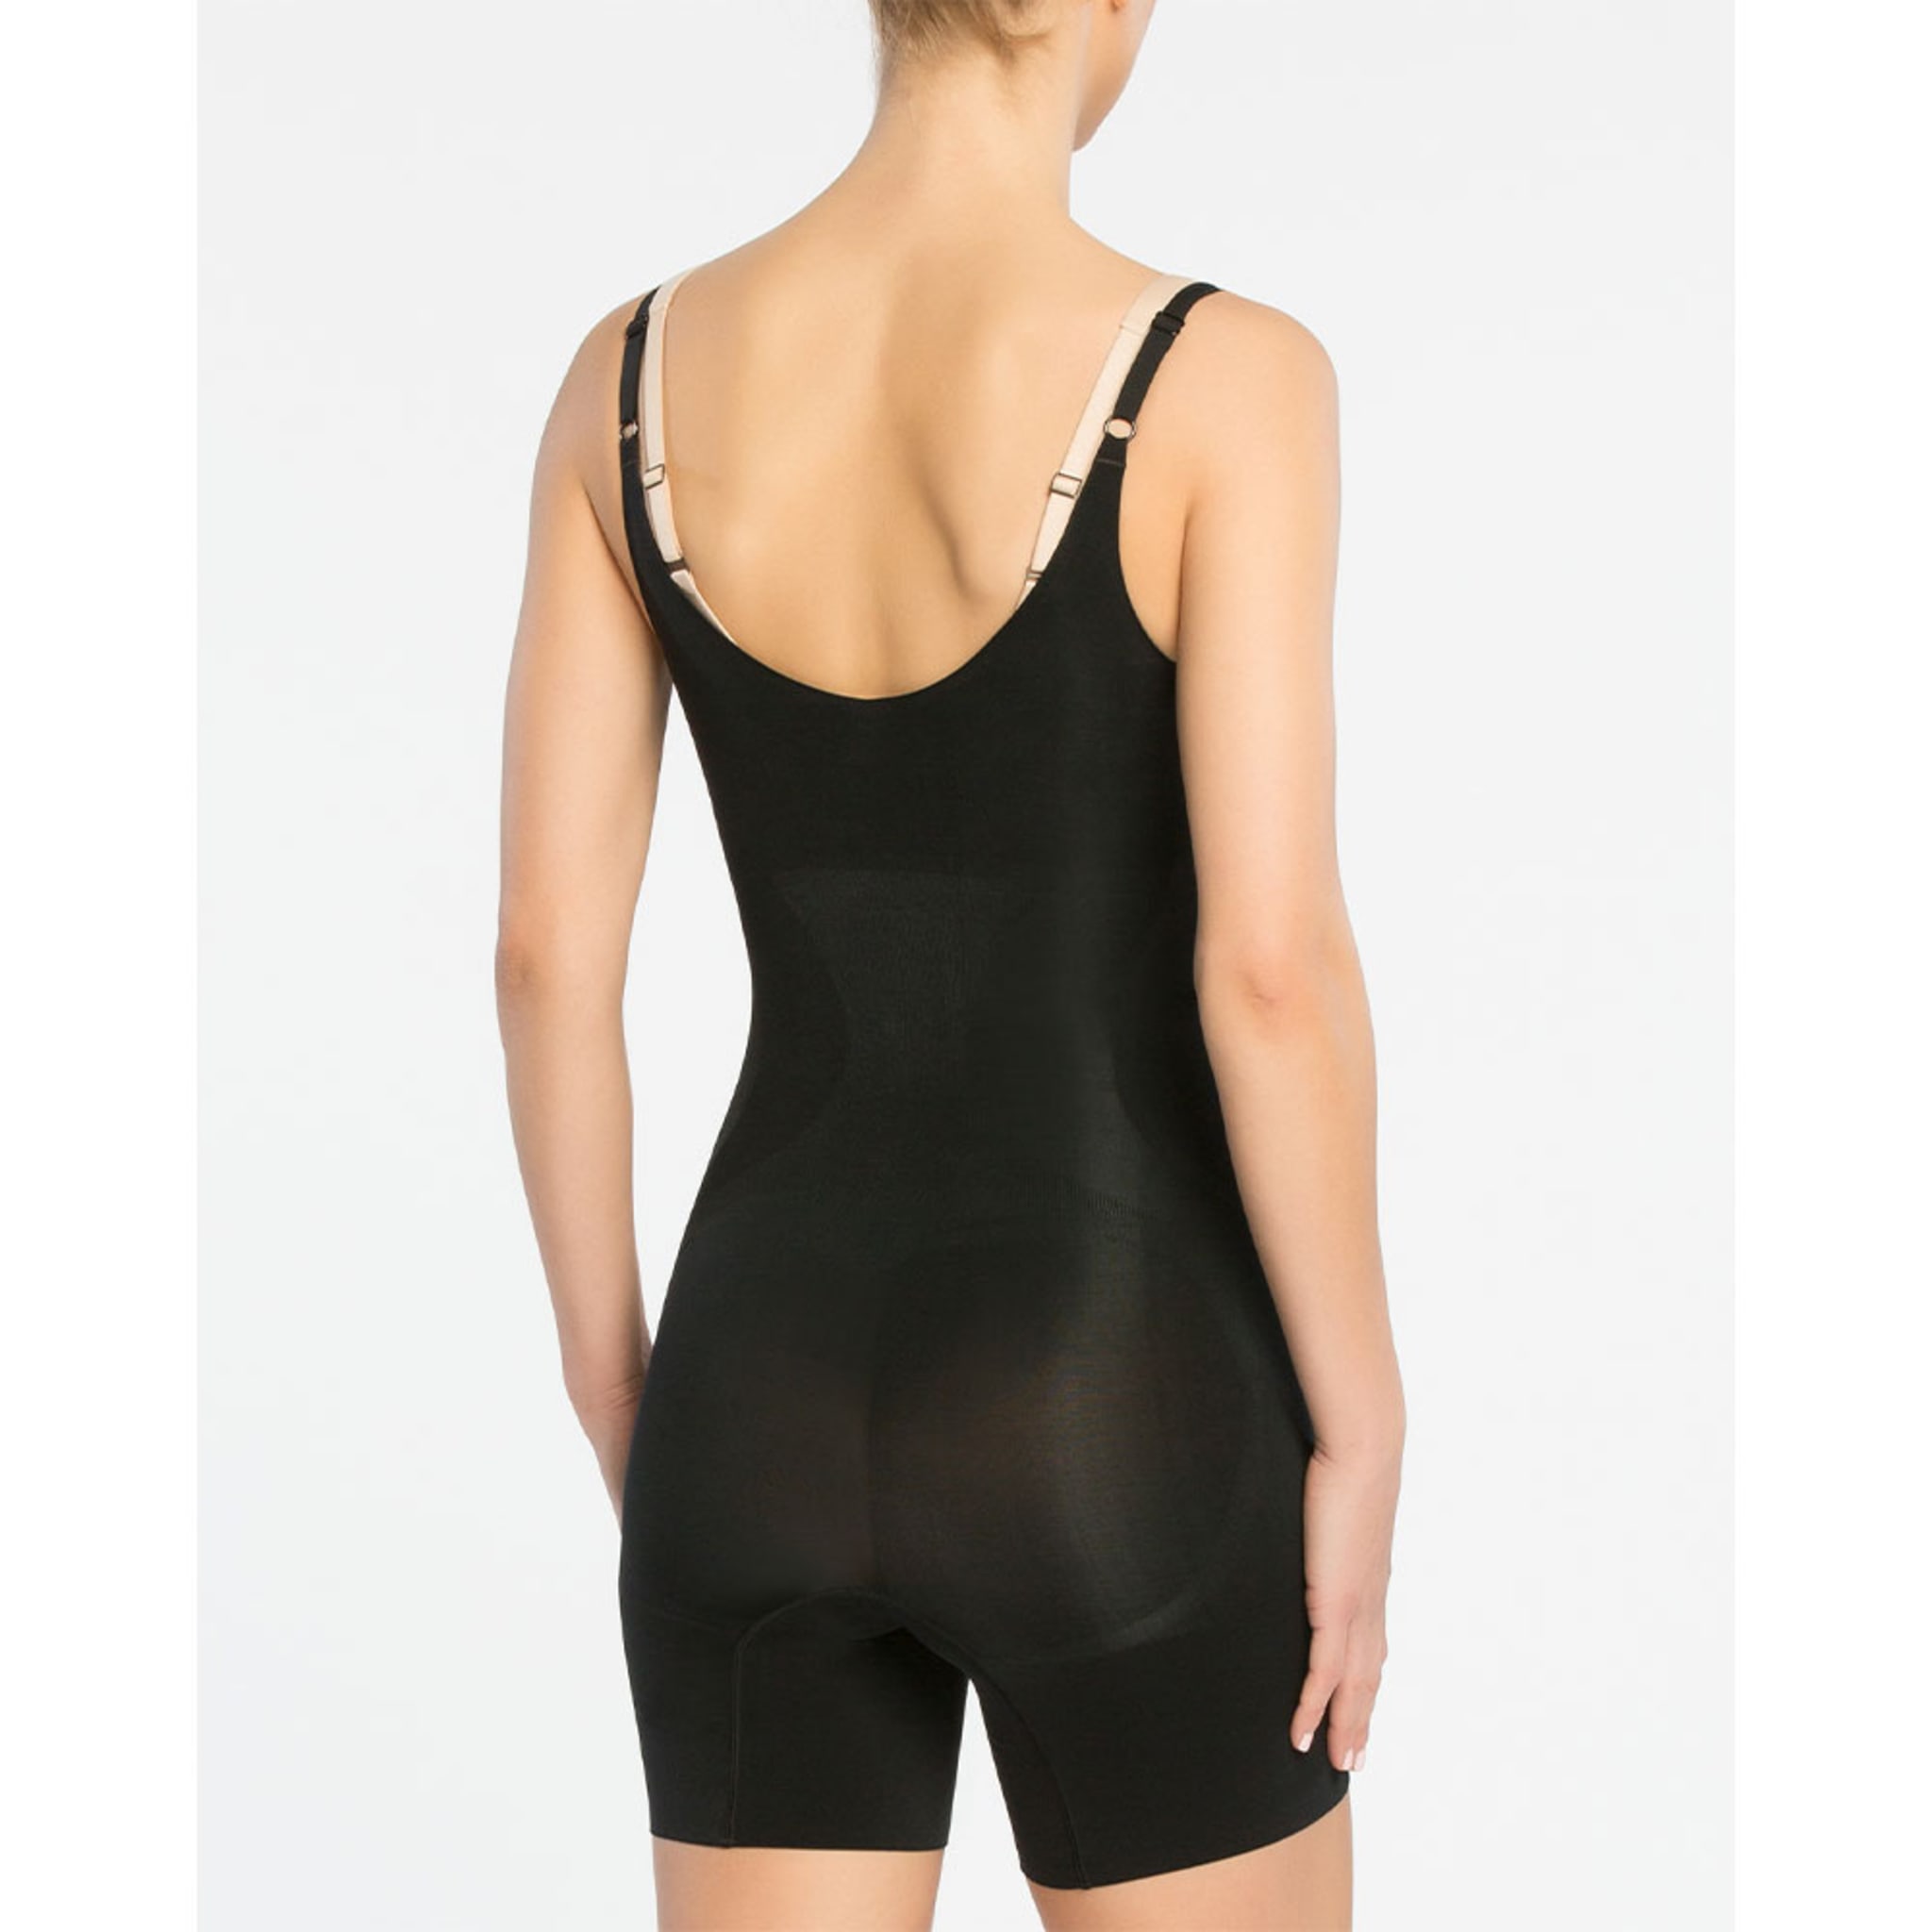 Assets by Spanx Women's Remarkable Results Open-Bust Brief Bodysuit - Beige  L - Simpson Advanced Chiropractic & Medical Center